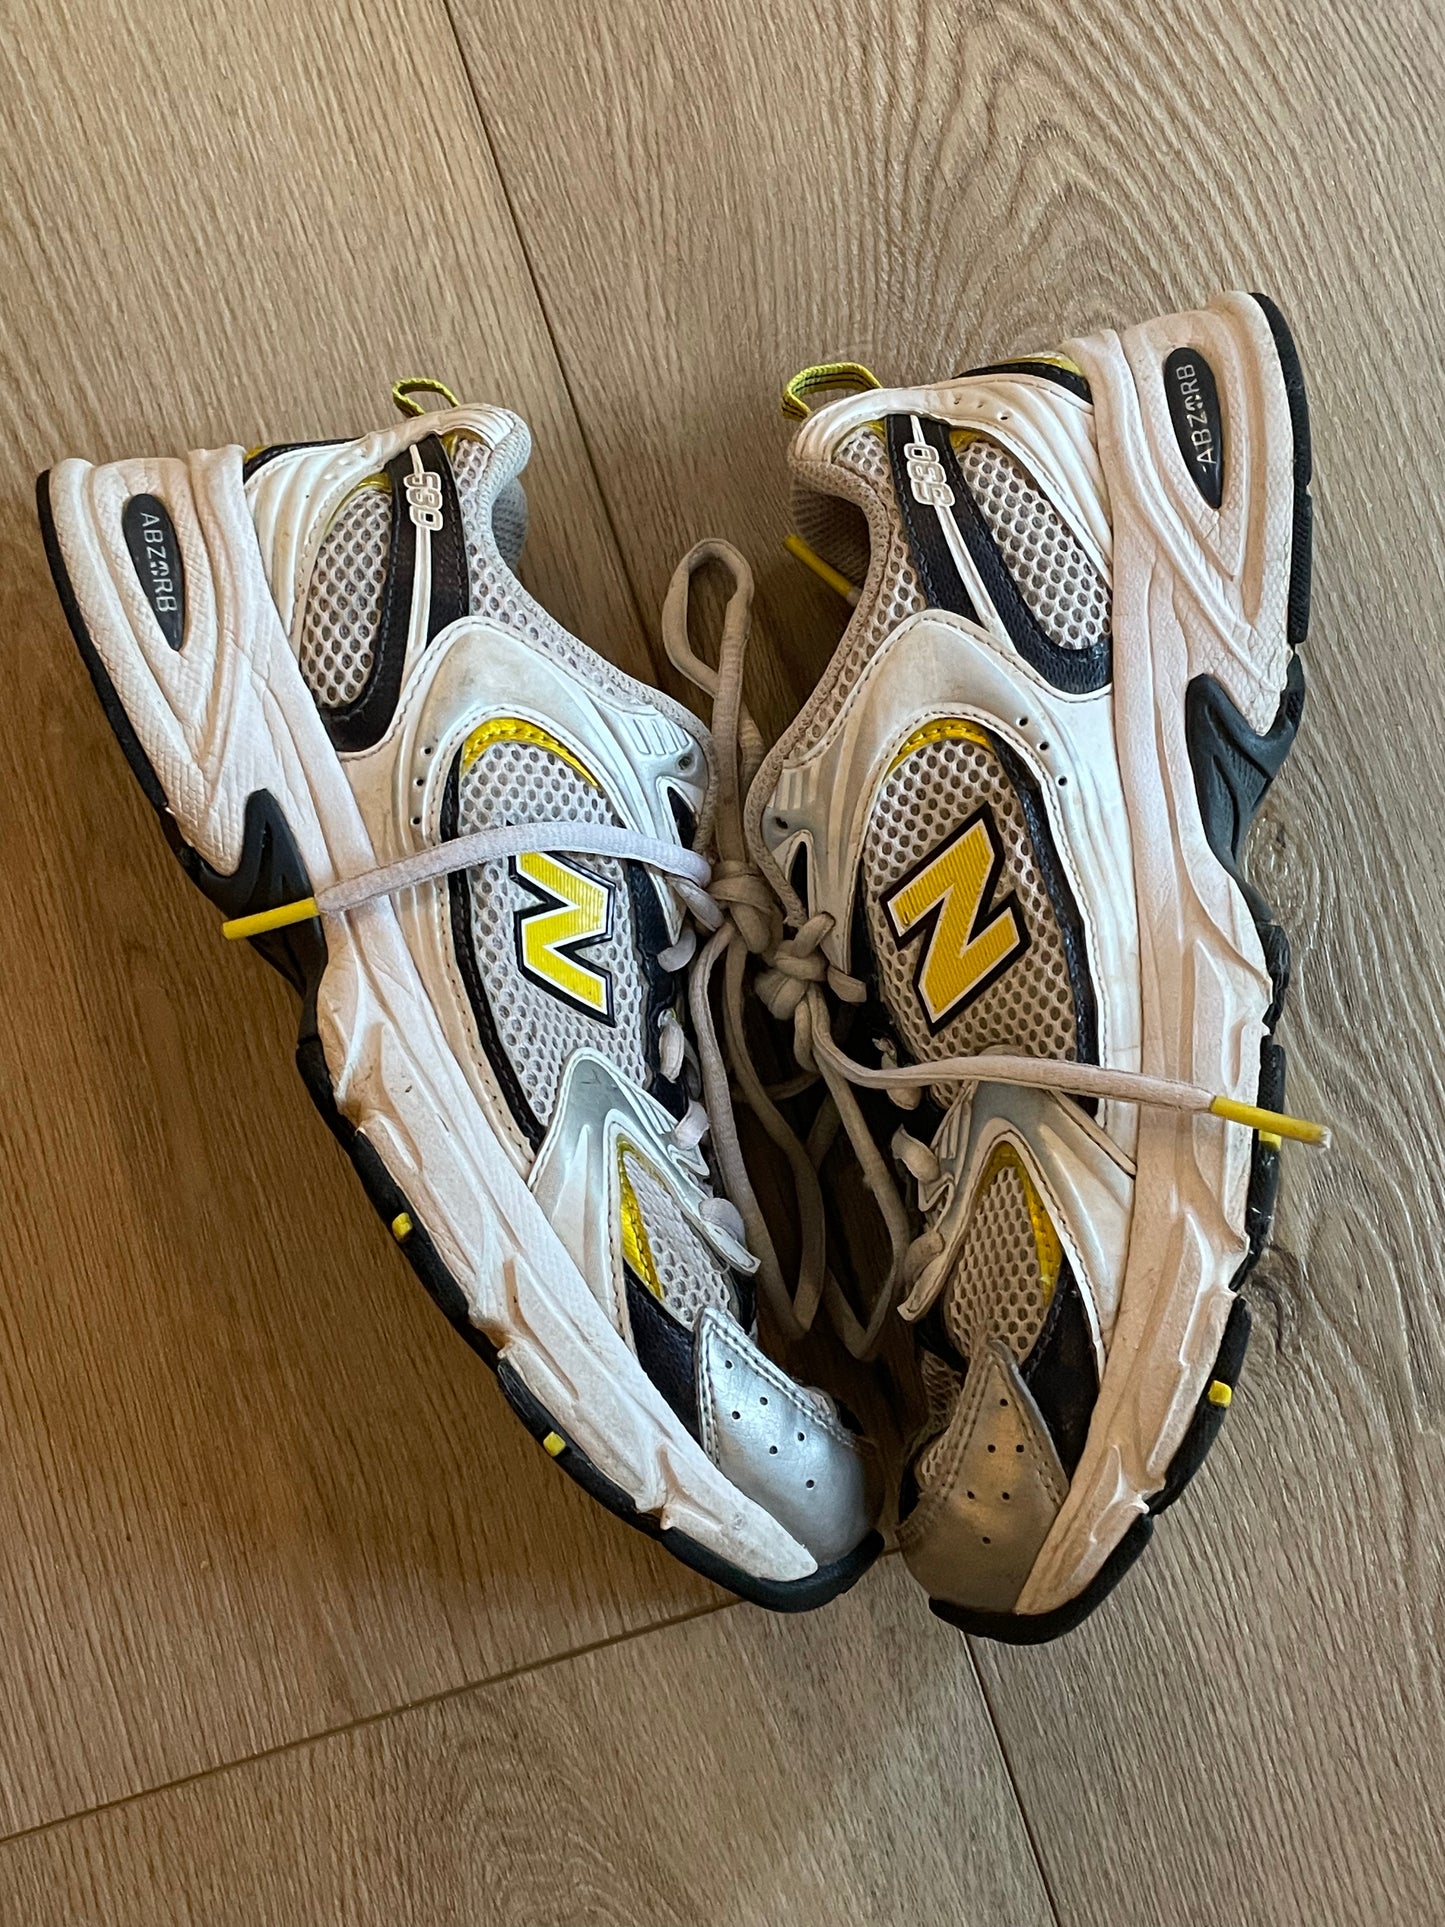 PEARLE closet - New Balance 530 Sneakers